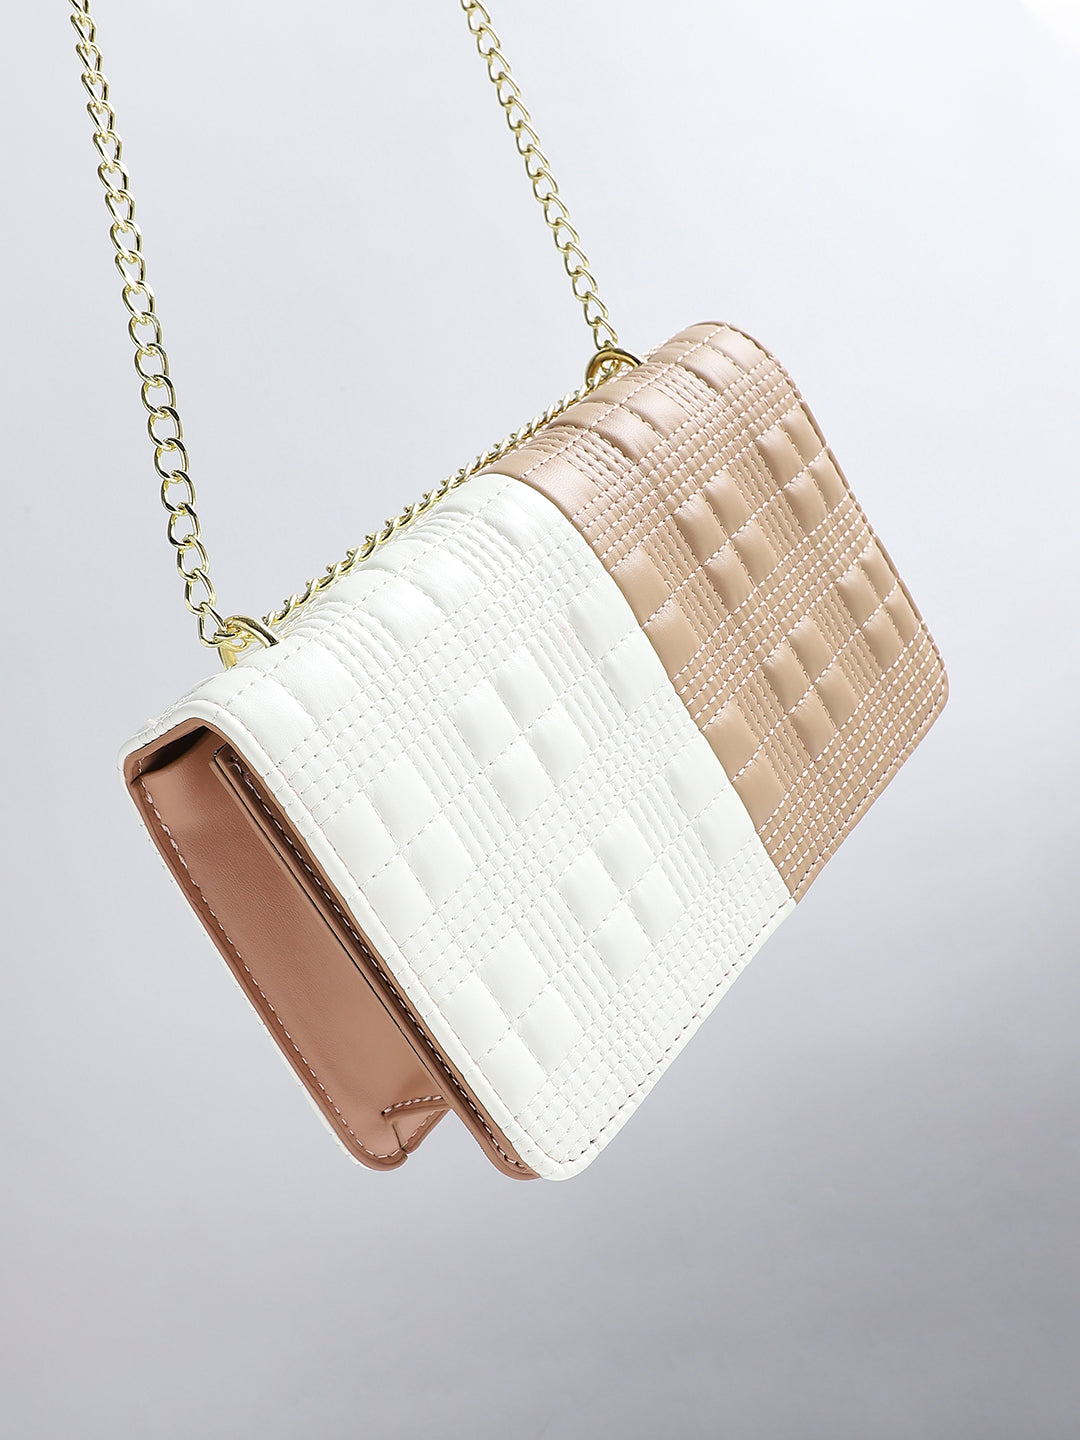 Contrast Quilted Sling Bag - White & Beige